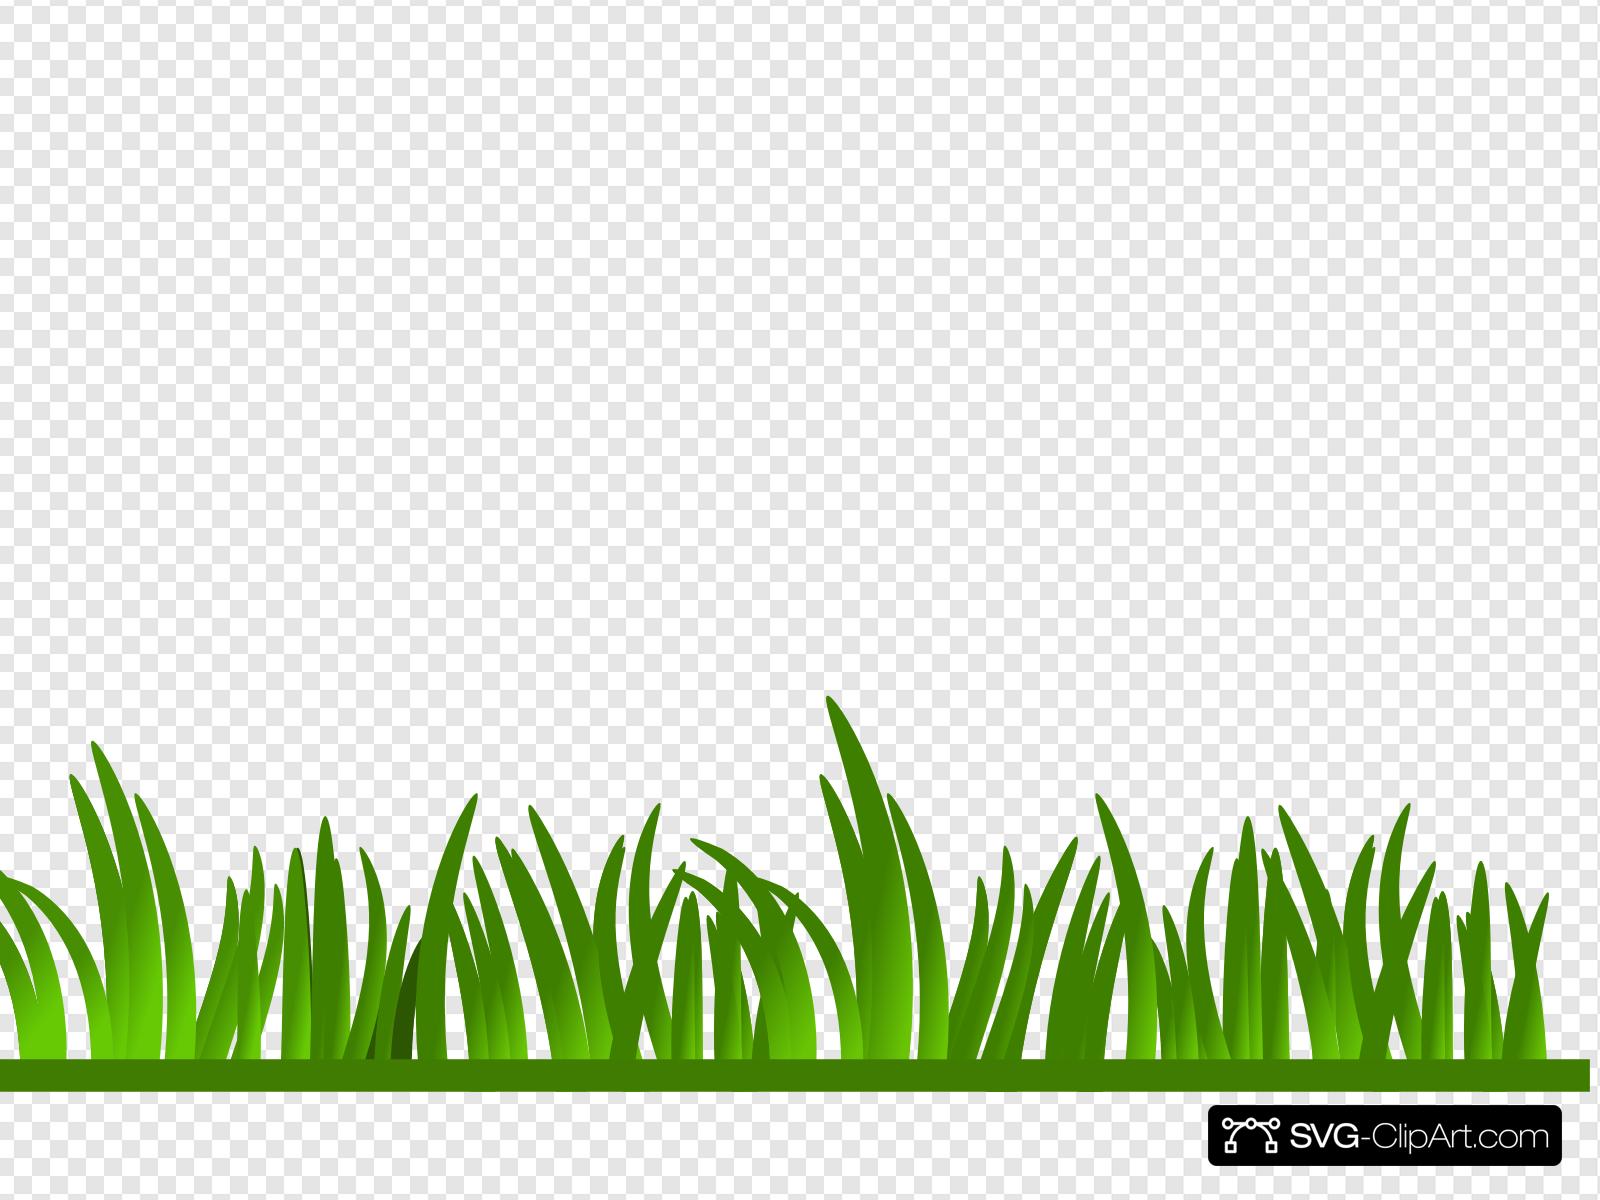 Green Grass Clip art, Icon and SVG